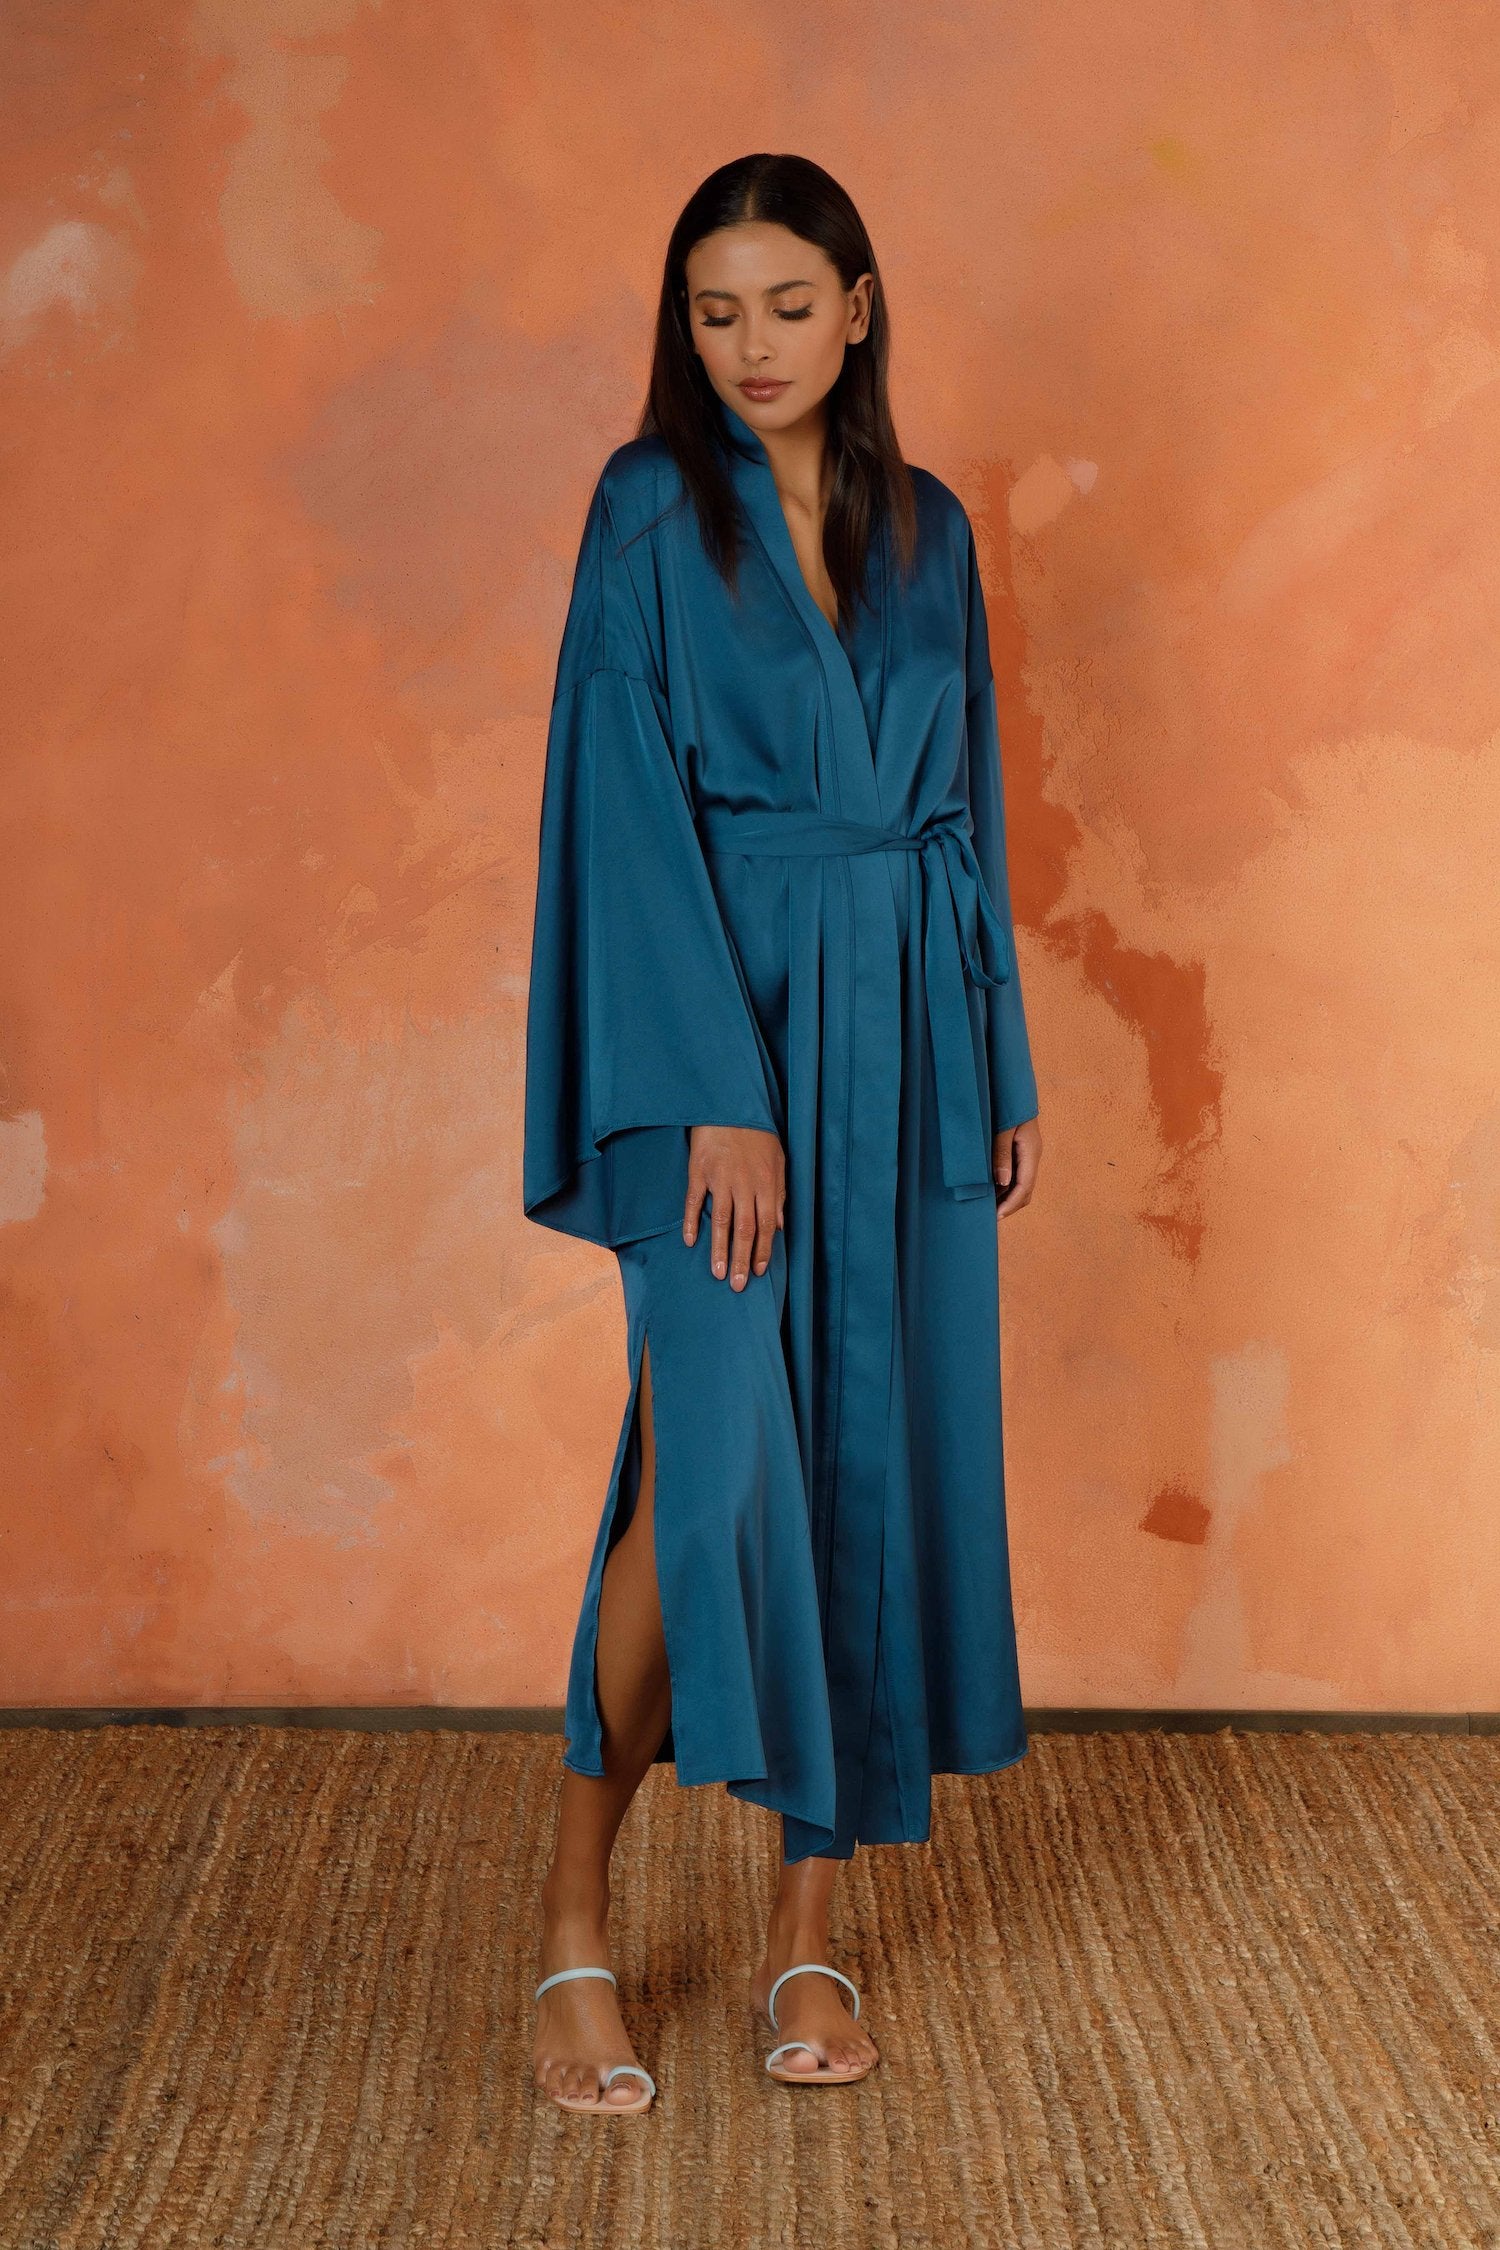 The Ink Signature Mid-Length Robe is our modern and relaxed go-to for lounging around the house or layering over your look to head out the door and take on the day. Featuring subtly flared sleeves, to-the-knee side slits, and hidden on seam pockets (for all the important little things) you’ve just found the statement piece your wardrobe’s been missing.   All the pieces in our LOUNGE collection have been developed in a washable satin that feels like silk but can wash, wear, jet set, repeat.